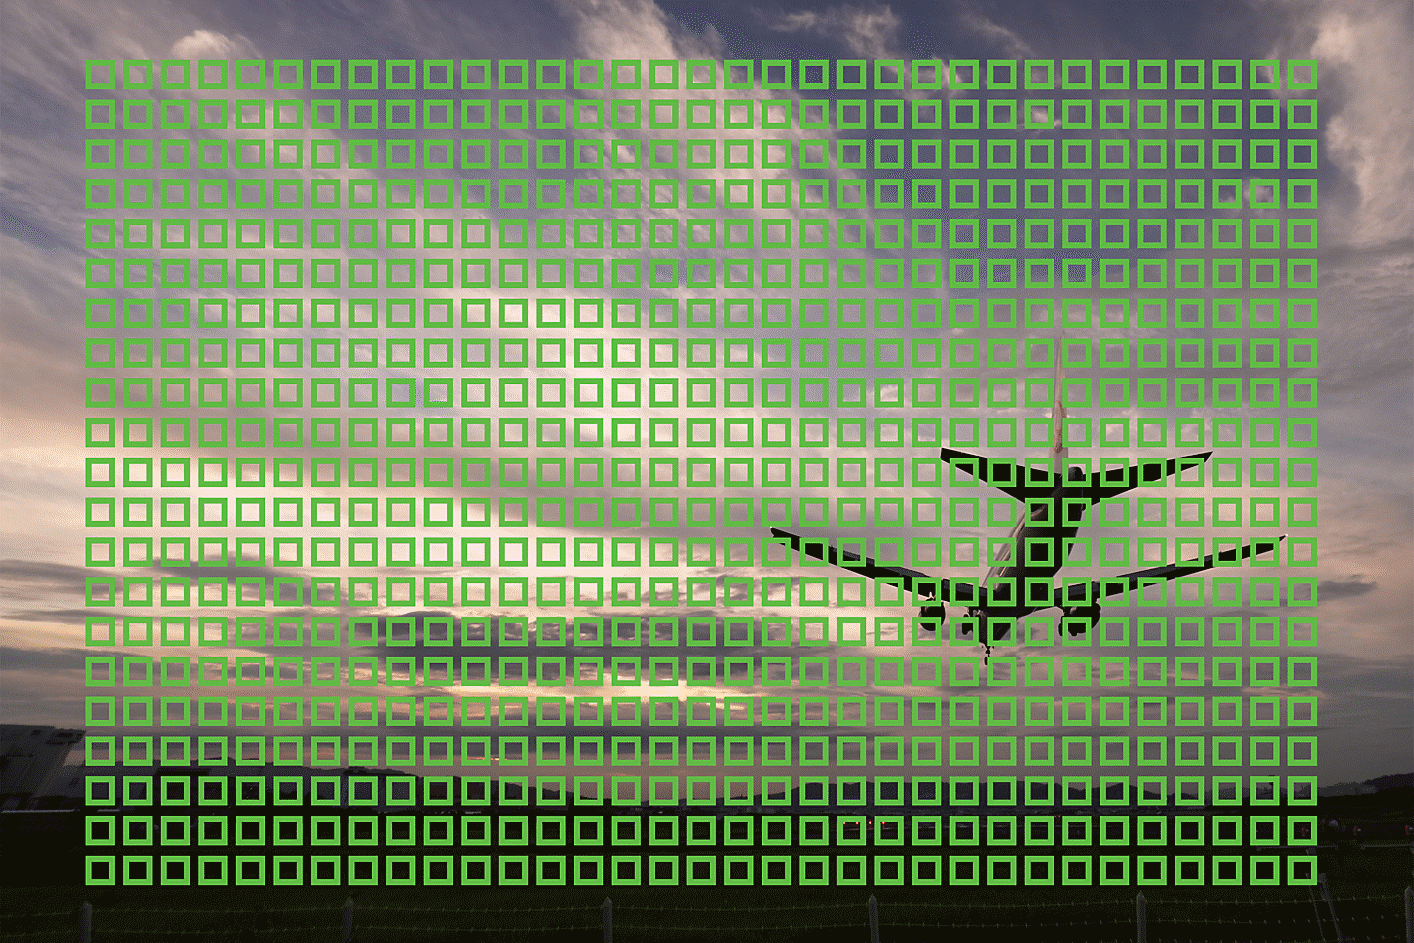 Example image of a flying airplane with small squares showing the 693 AF points across the image